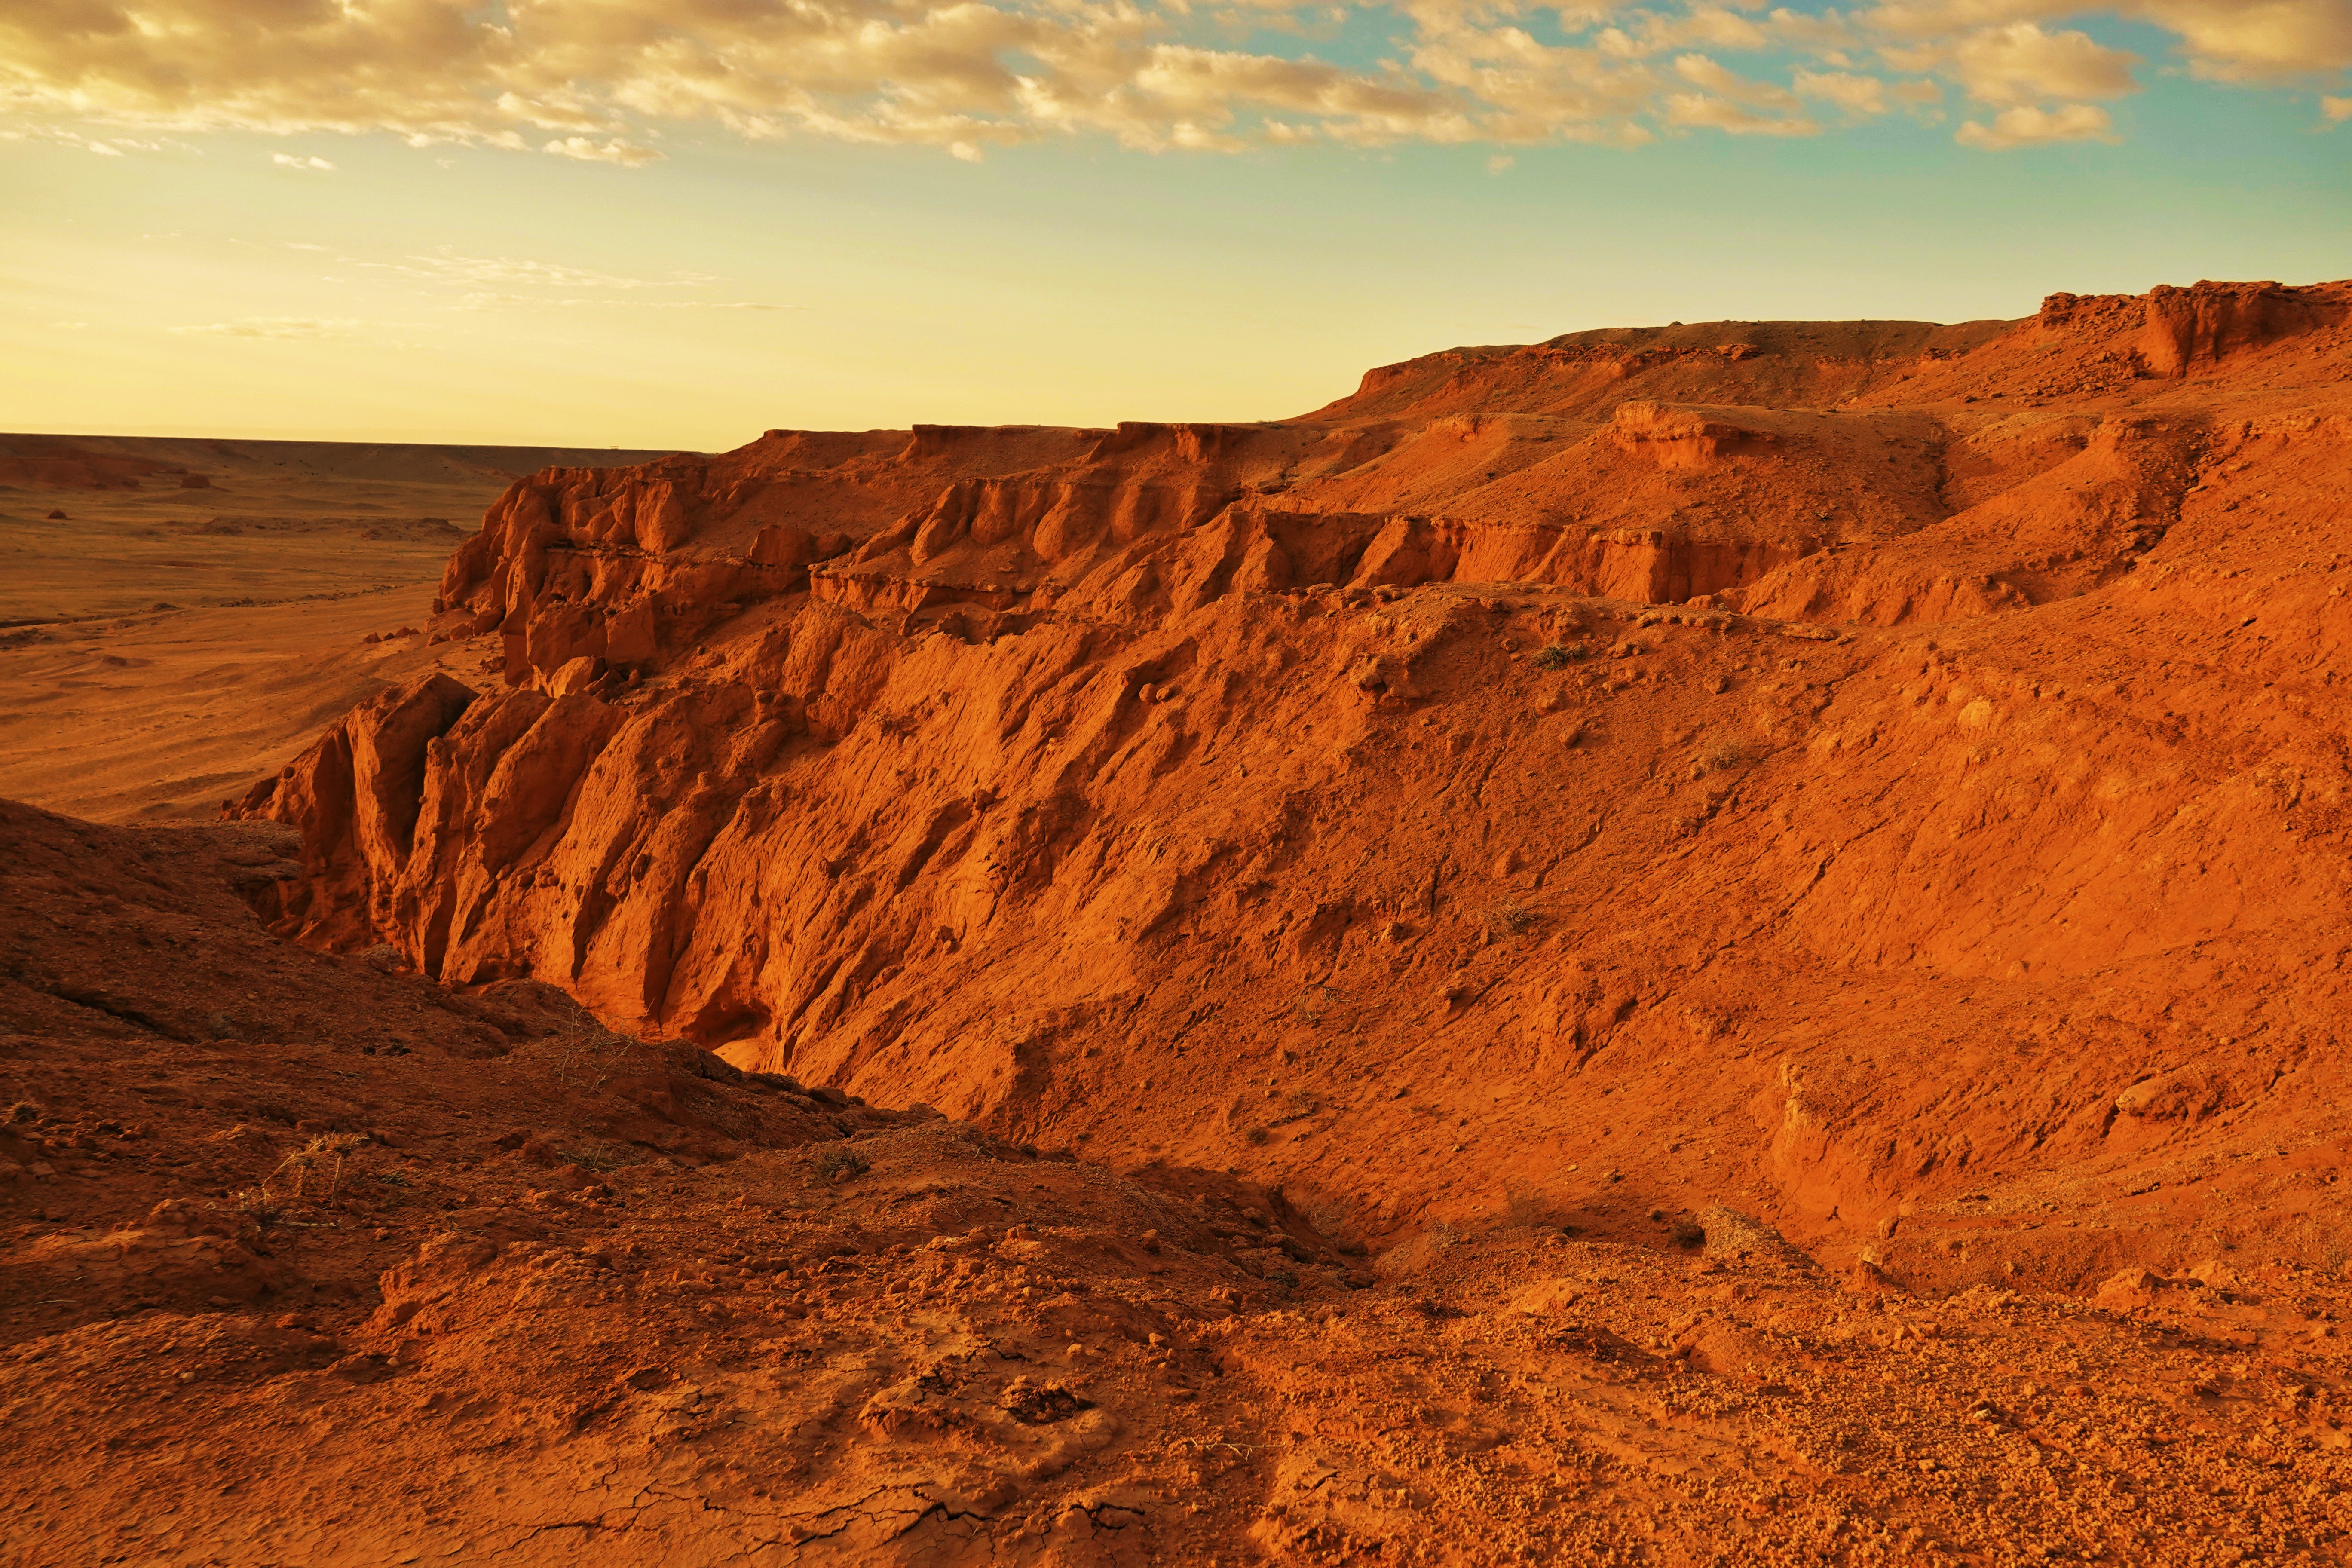 At the Flaming Cliffs in Mongolia's Gobi, sunset light